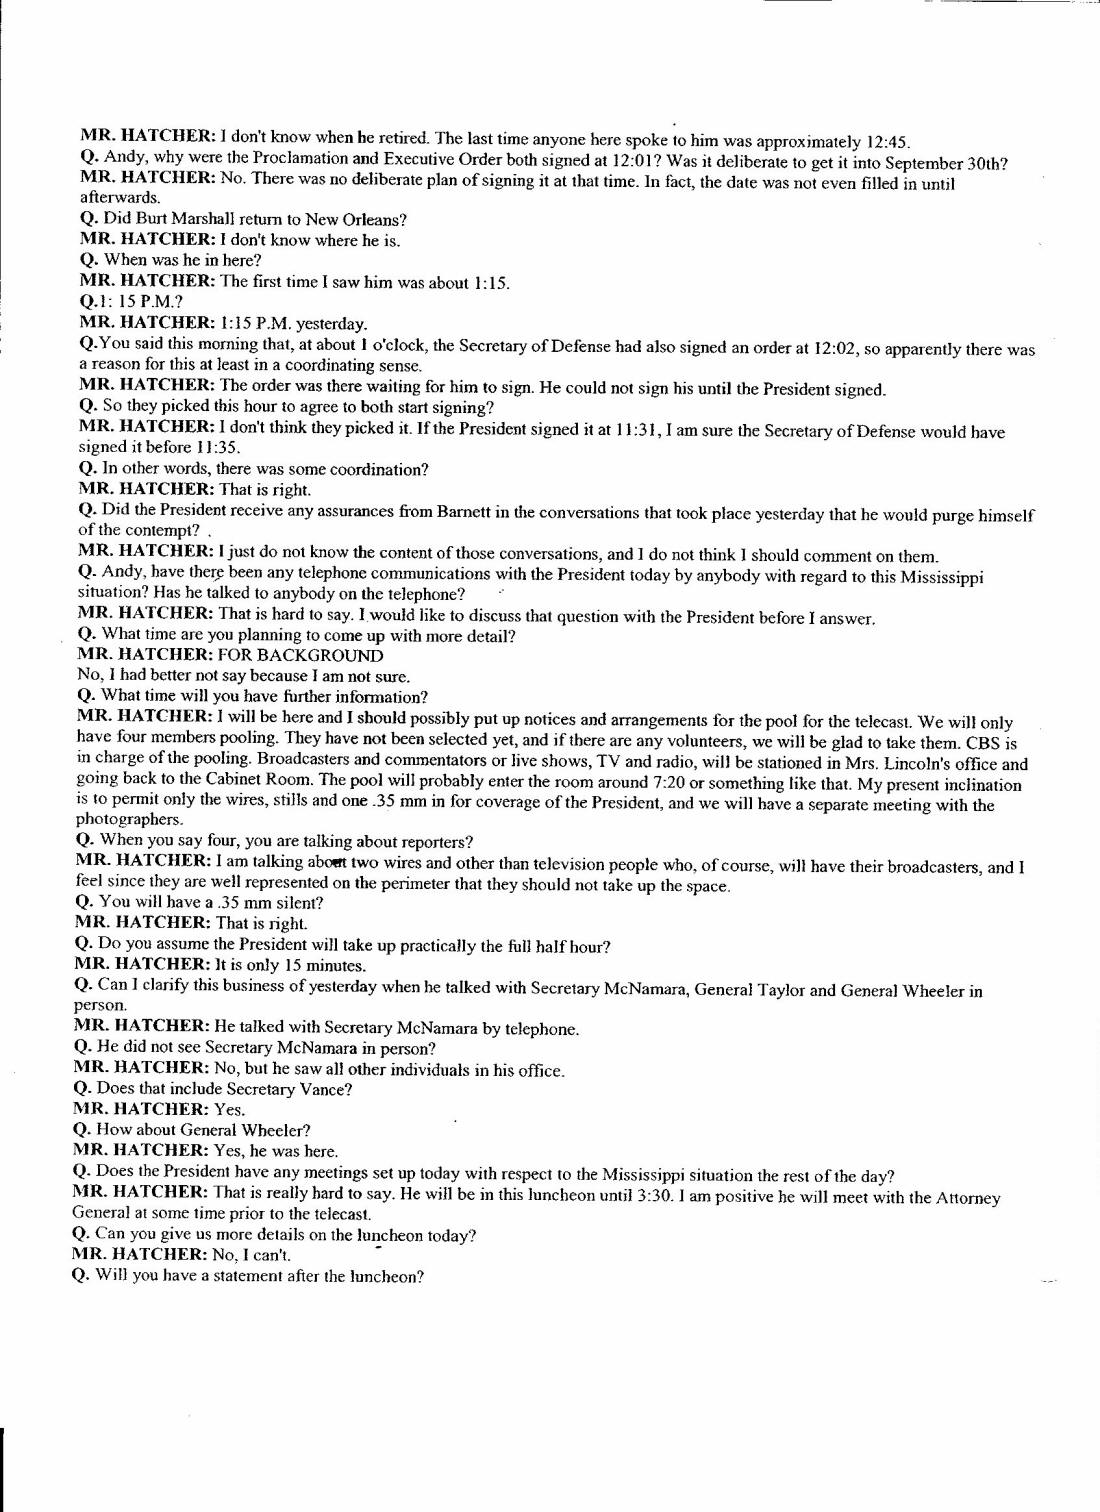 Transcript of News Conference page 4